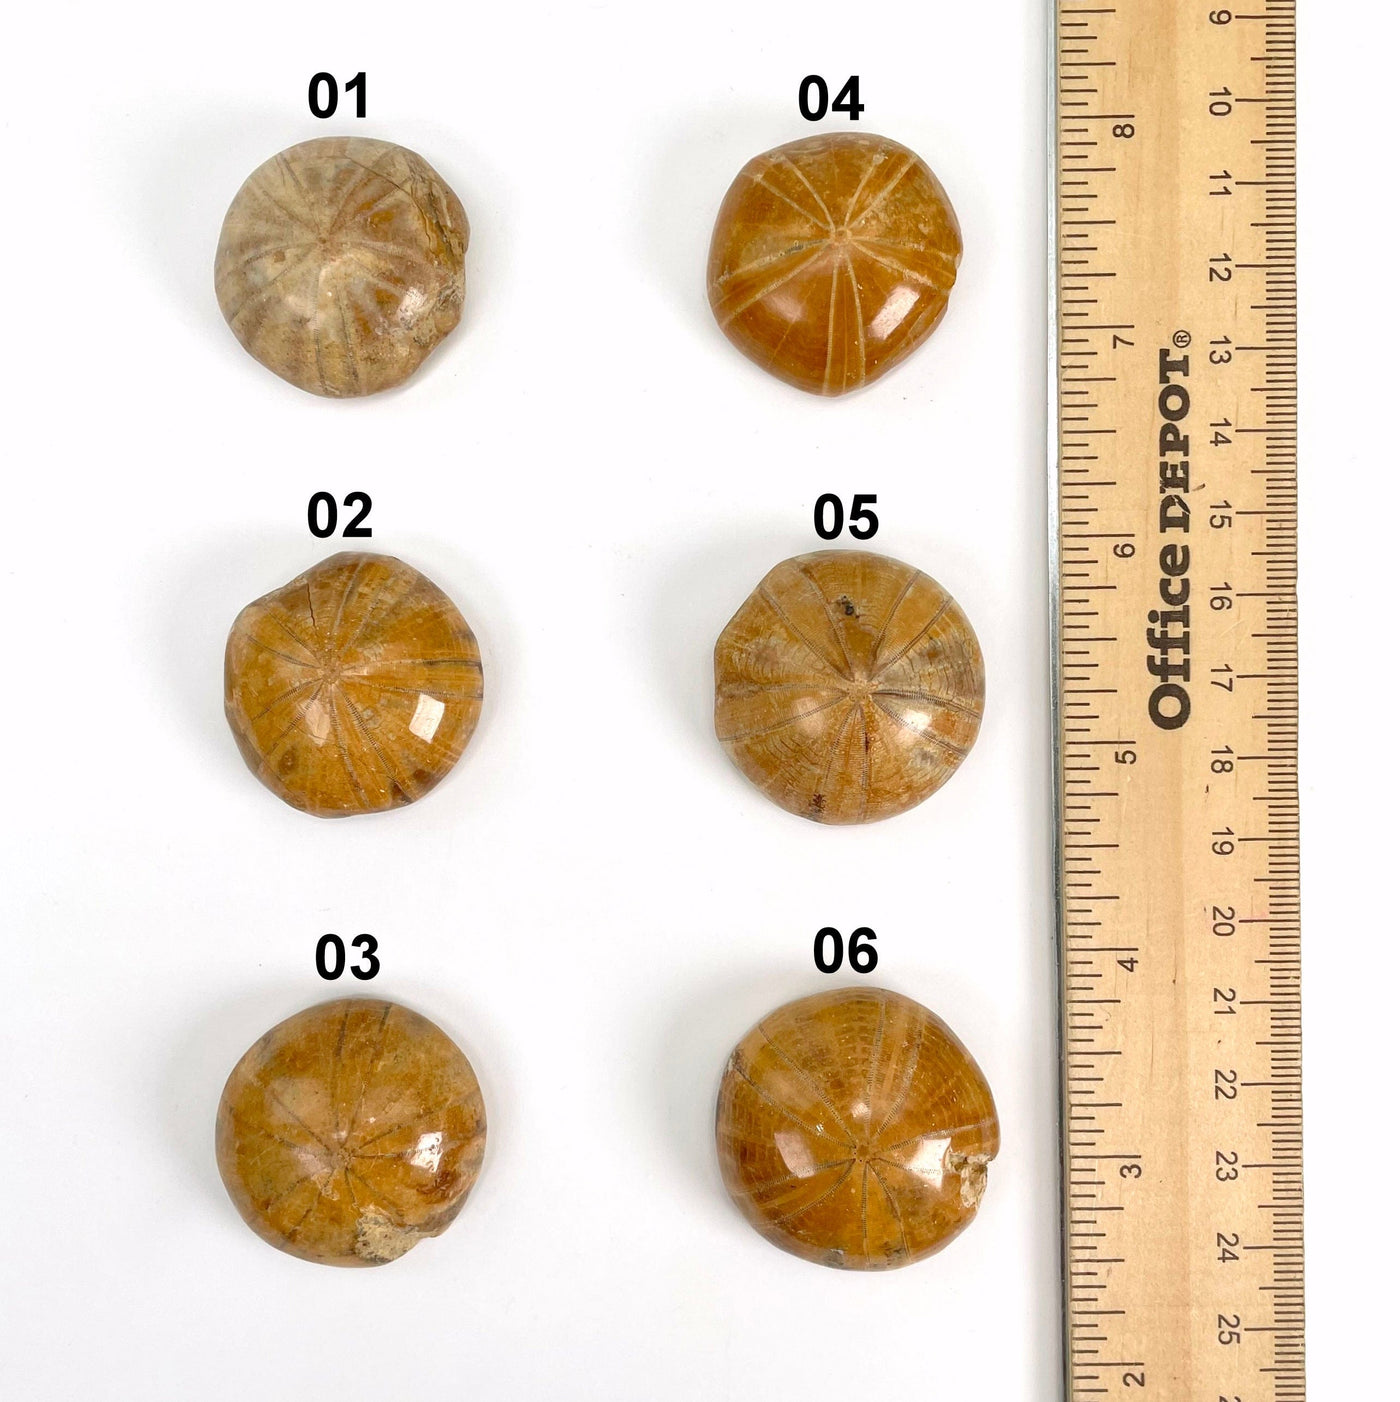 all six fossilized polished sand dollar options on white background with ruler for size reference